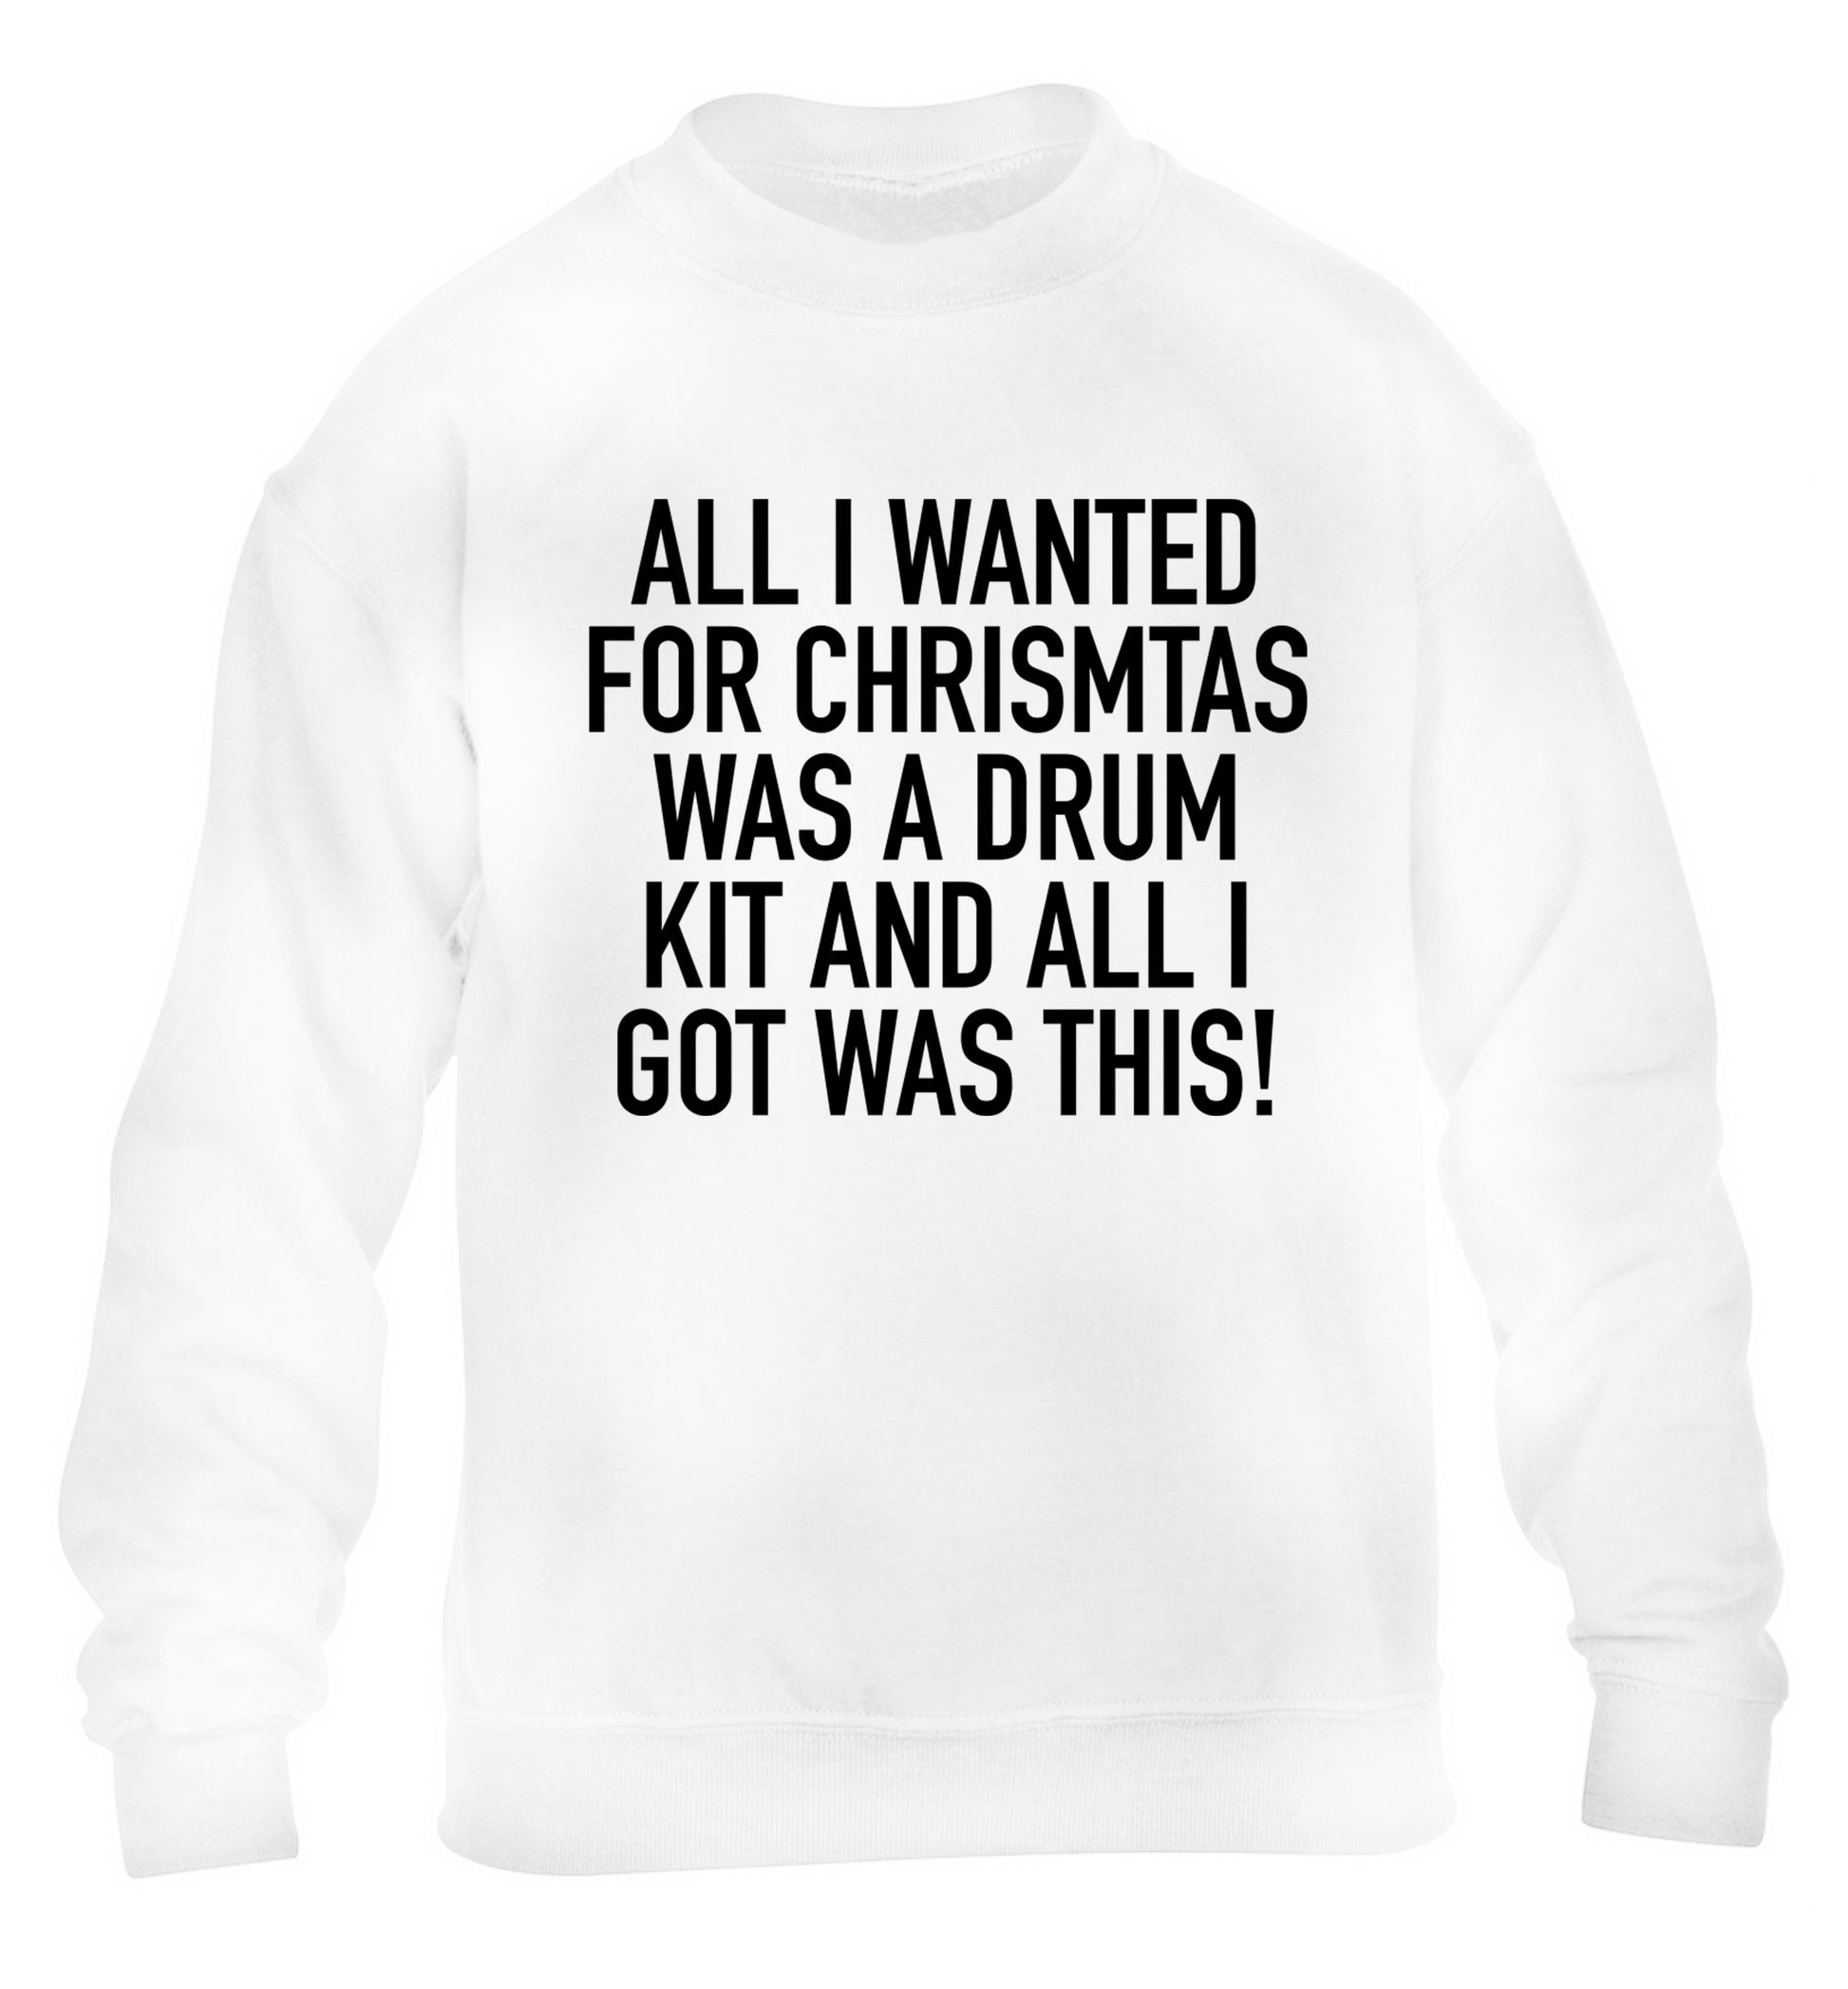 All I wanted for Christmas was a drum kit and all I got was this! children's white sweater 12-14 Years